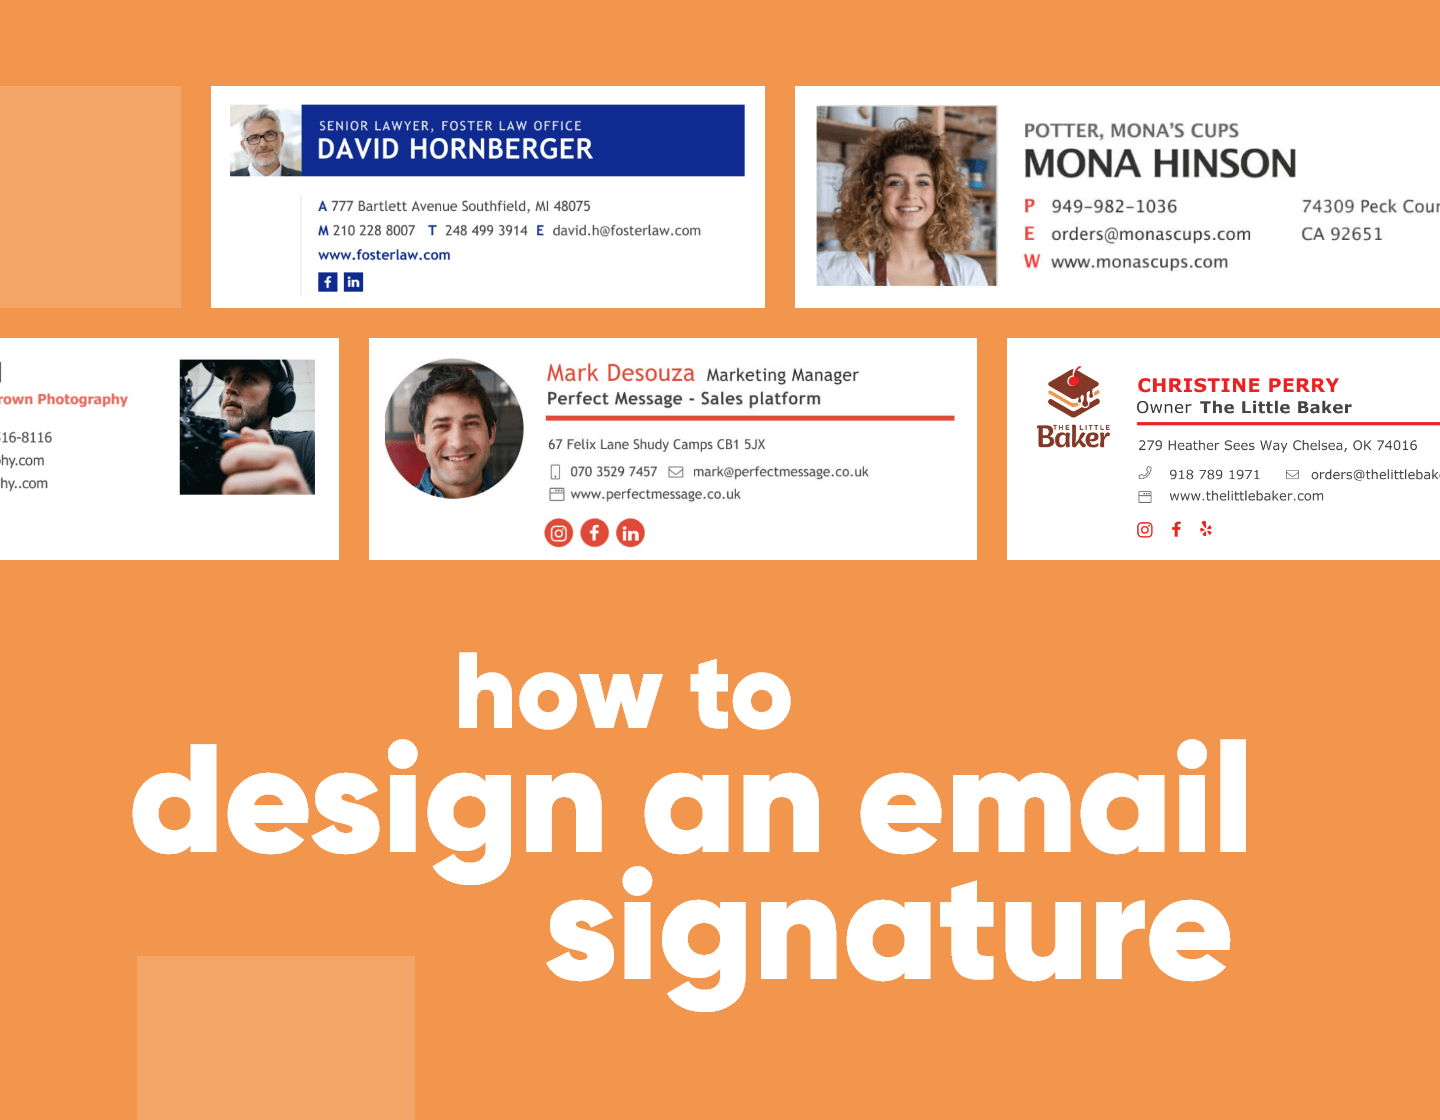 How to Design A Creative Email Signature For a Great First Impression